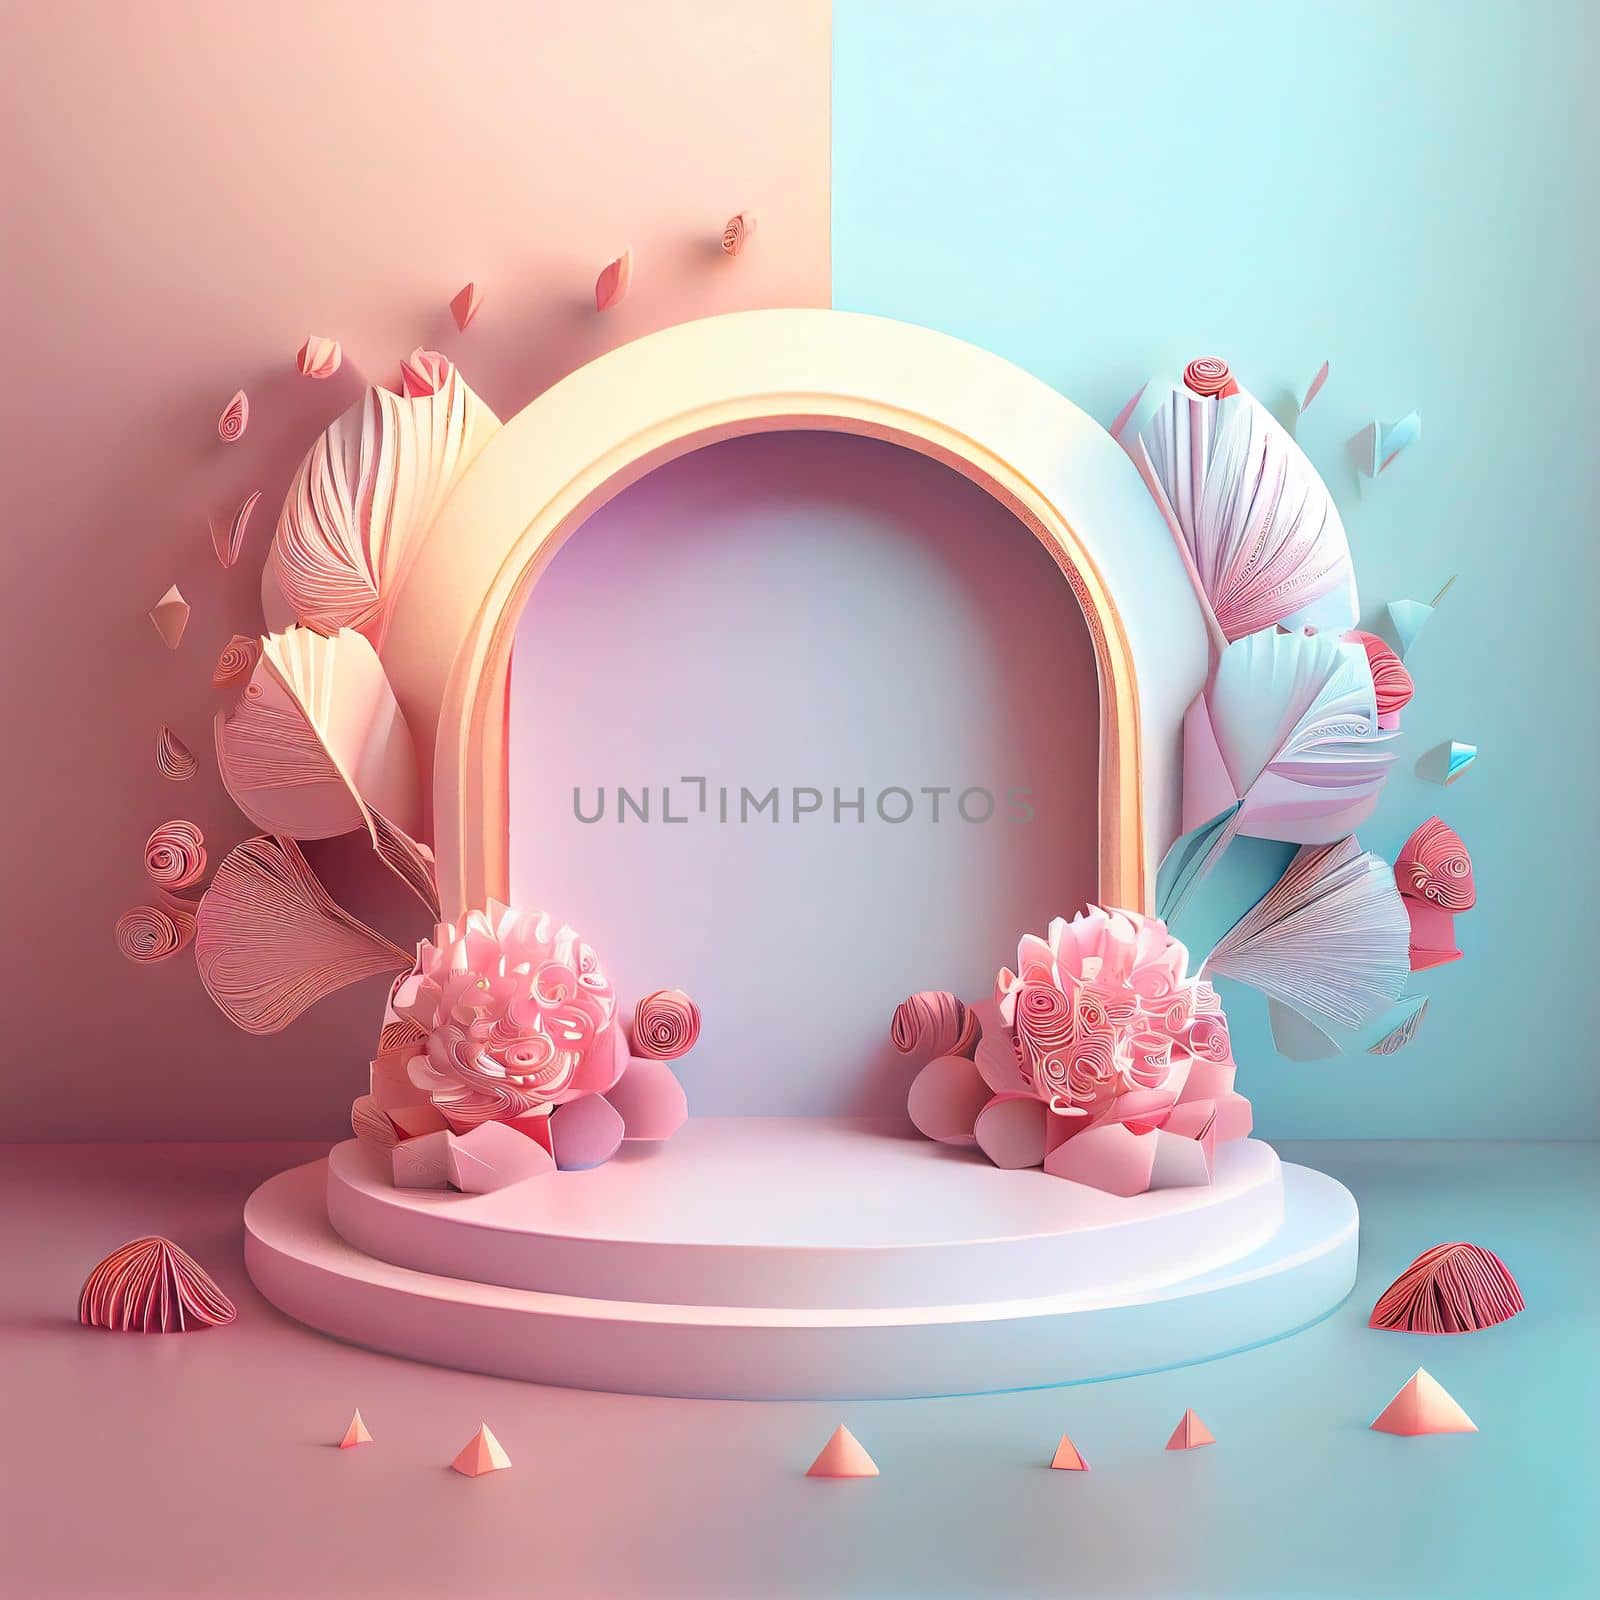 Pink podium 3d illustration for product display by templator